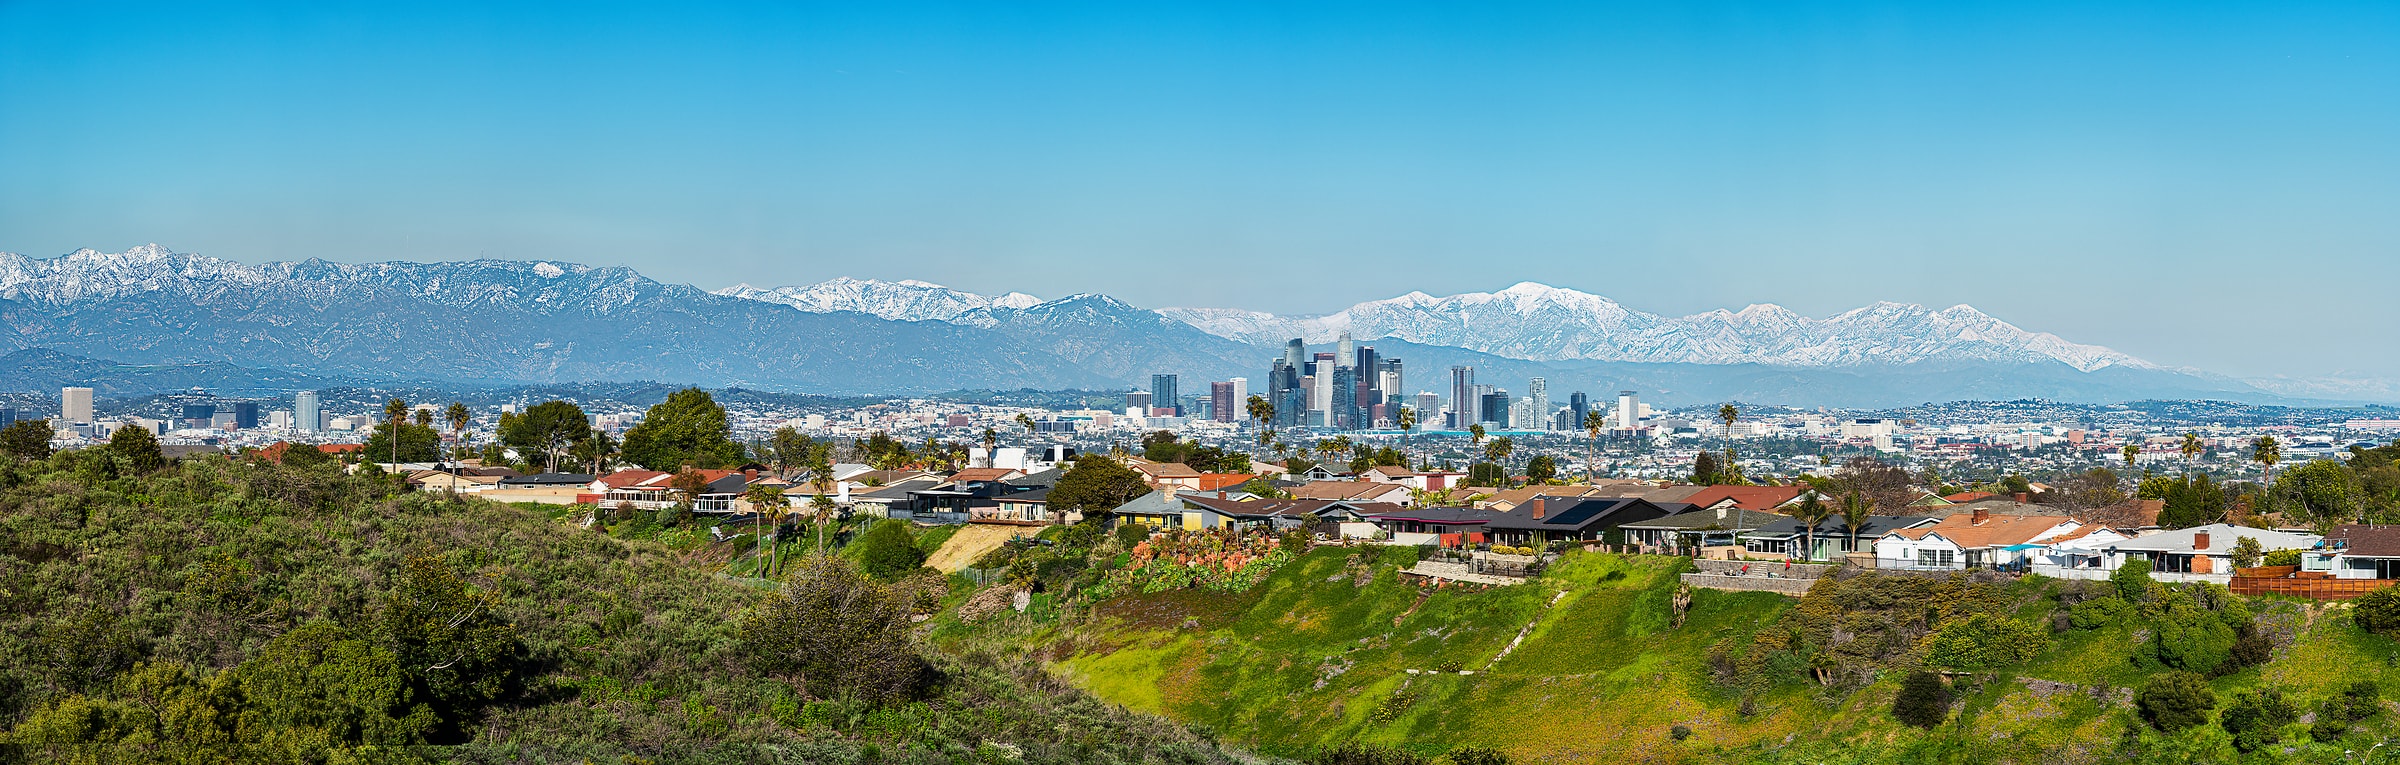 129 megapixels! A very high resolution, large-format VAST photo print of the Los Angeles skyline with snow on the mountains in the background; landscape photograph created by Jim Tarpo in Ladera Heights, California.